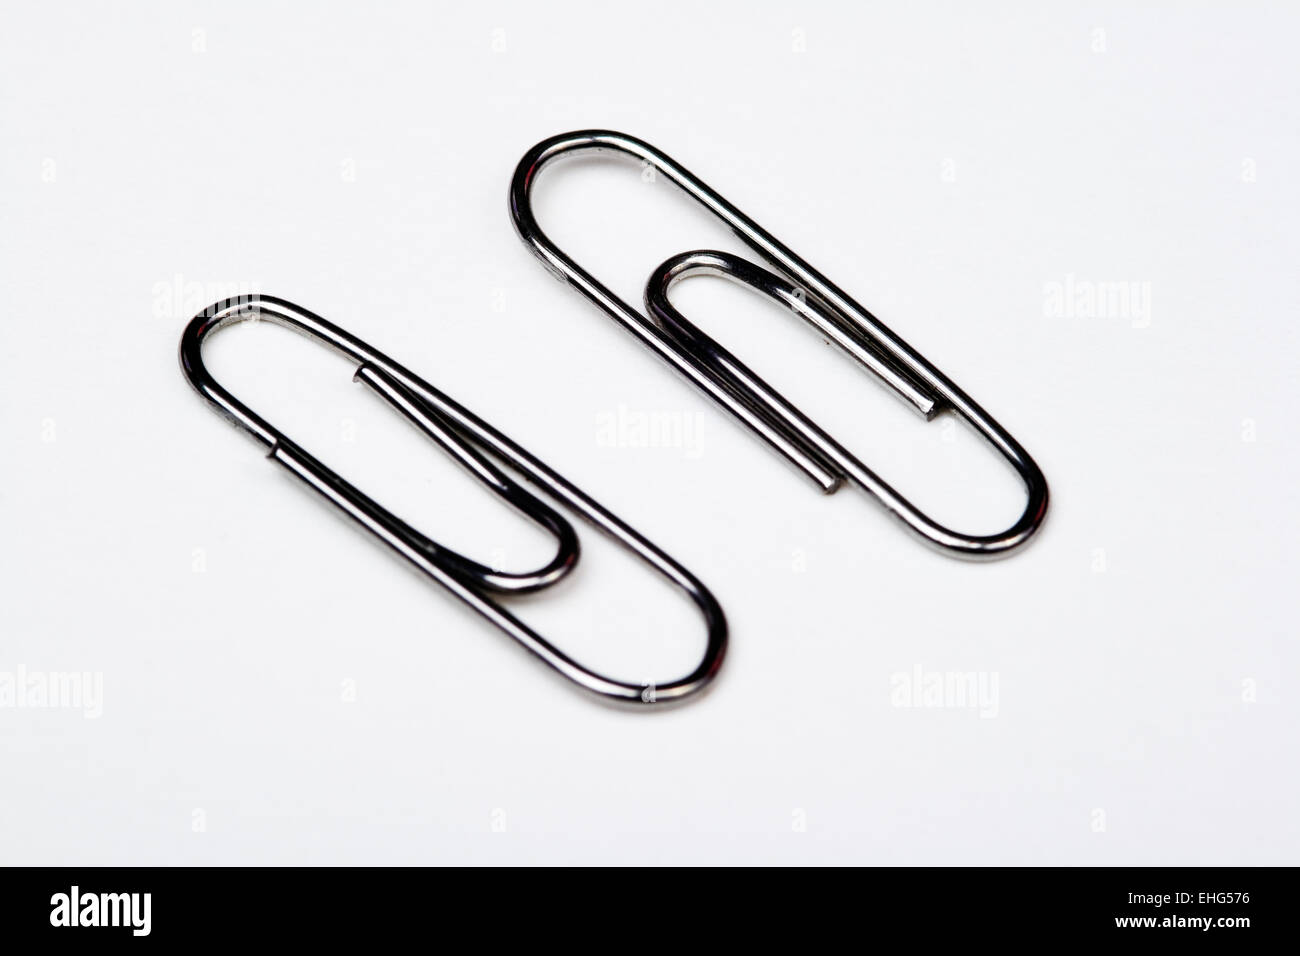 Muchos clips de metal sobre fondo blanco - A lot of metal paperclips on a white background Stock Photo